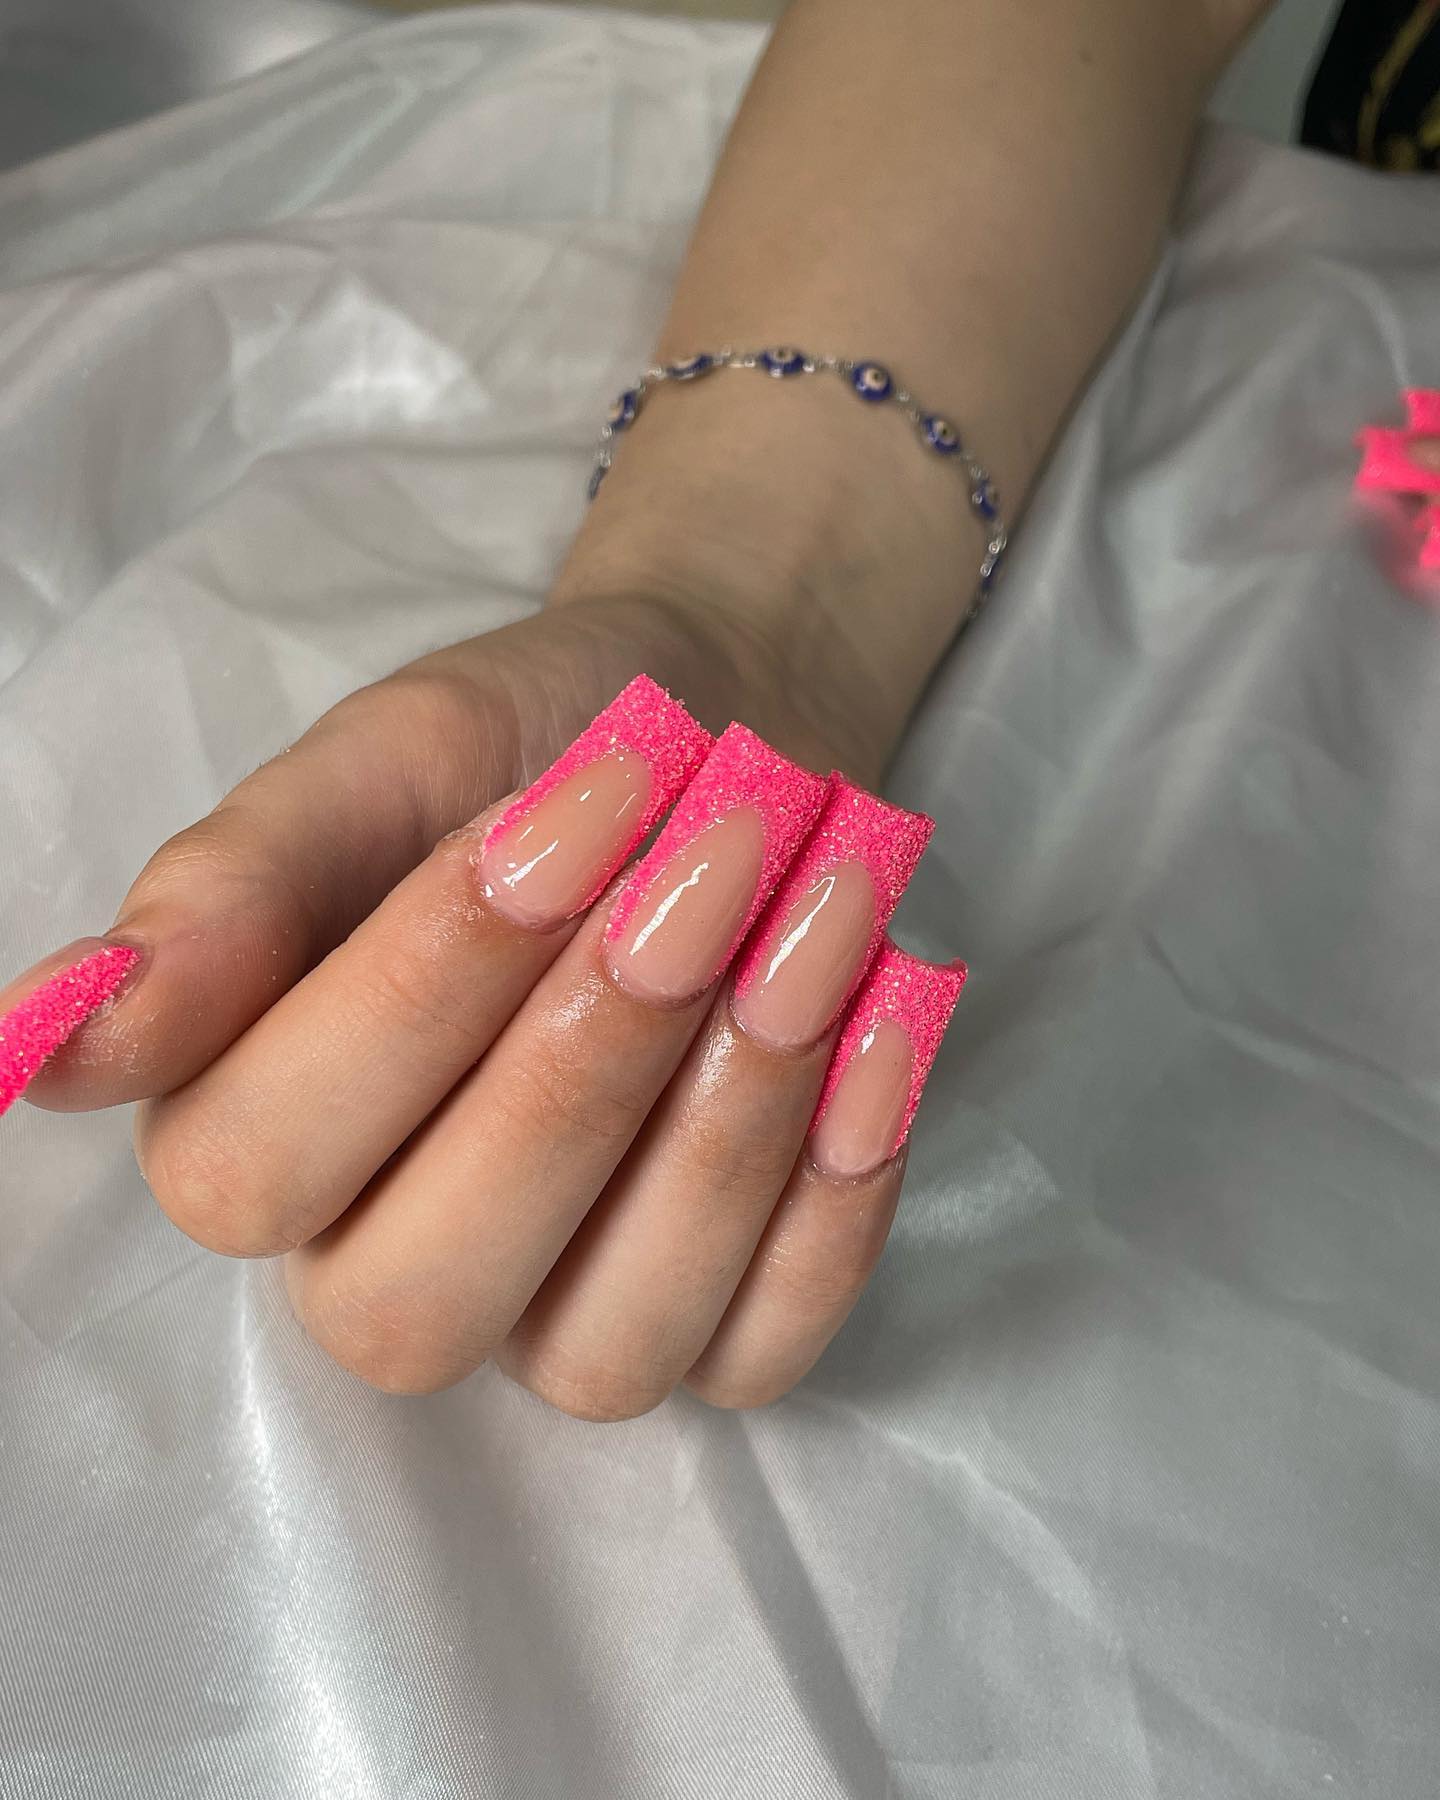 These bright and loud pink nails will look amazing for the summer! If you enjoy them and you fancy bright and party-inspired French nails, these are for you!